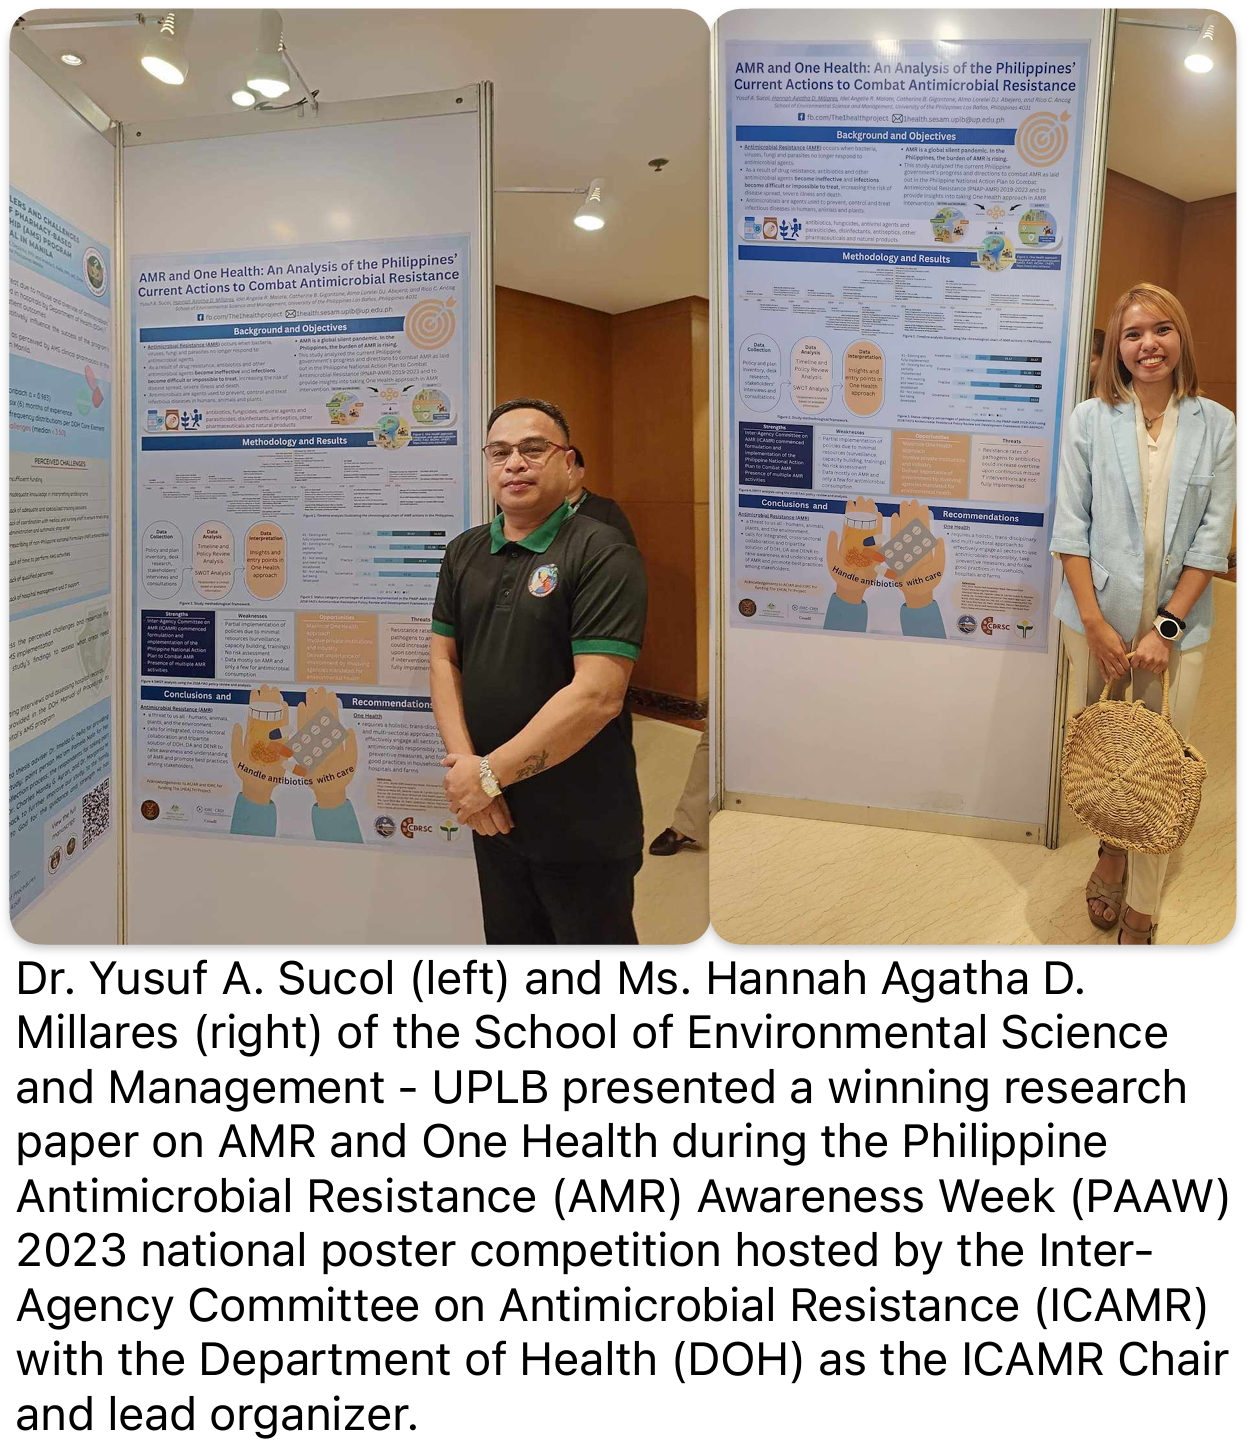 1HEALTH Project wins first place in the national antimicrobial resistance poster competition in the PAAW 2023